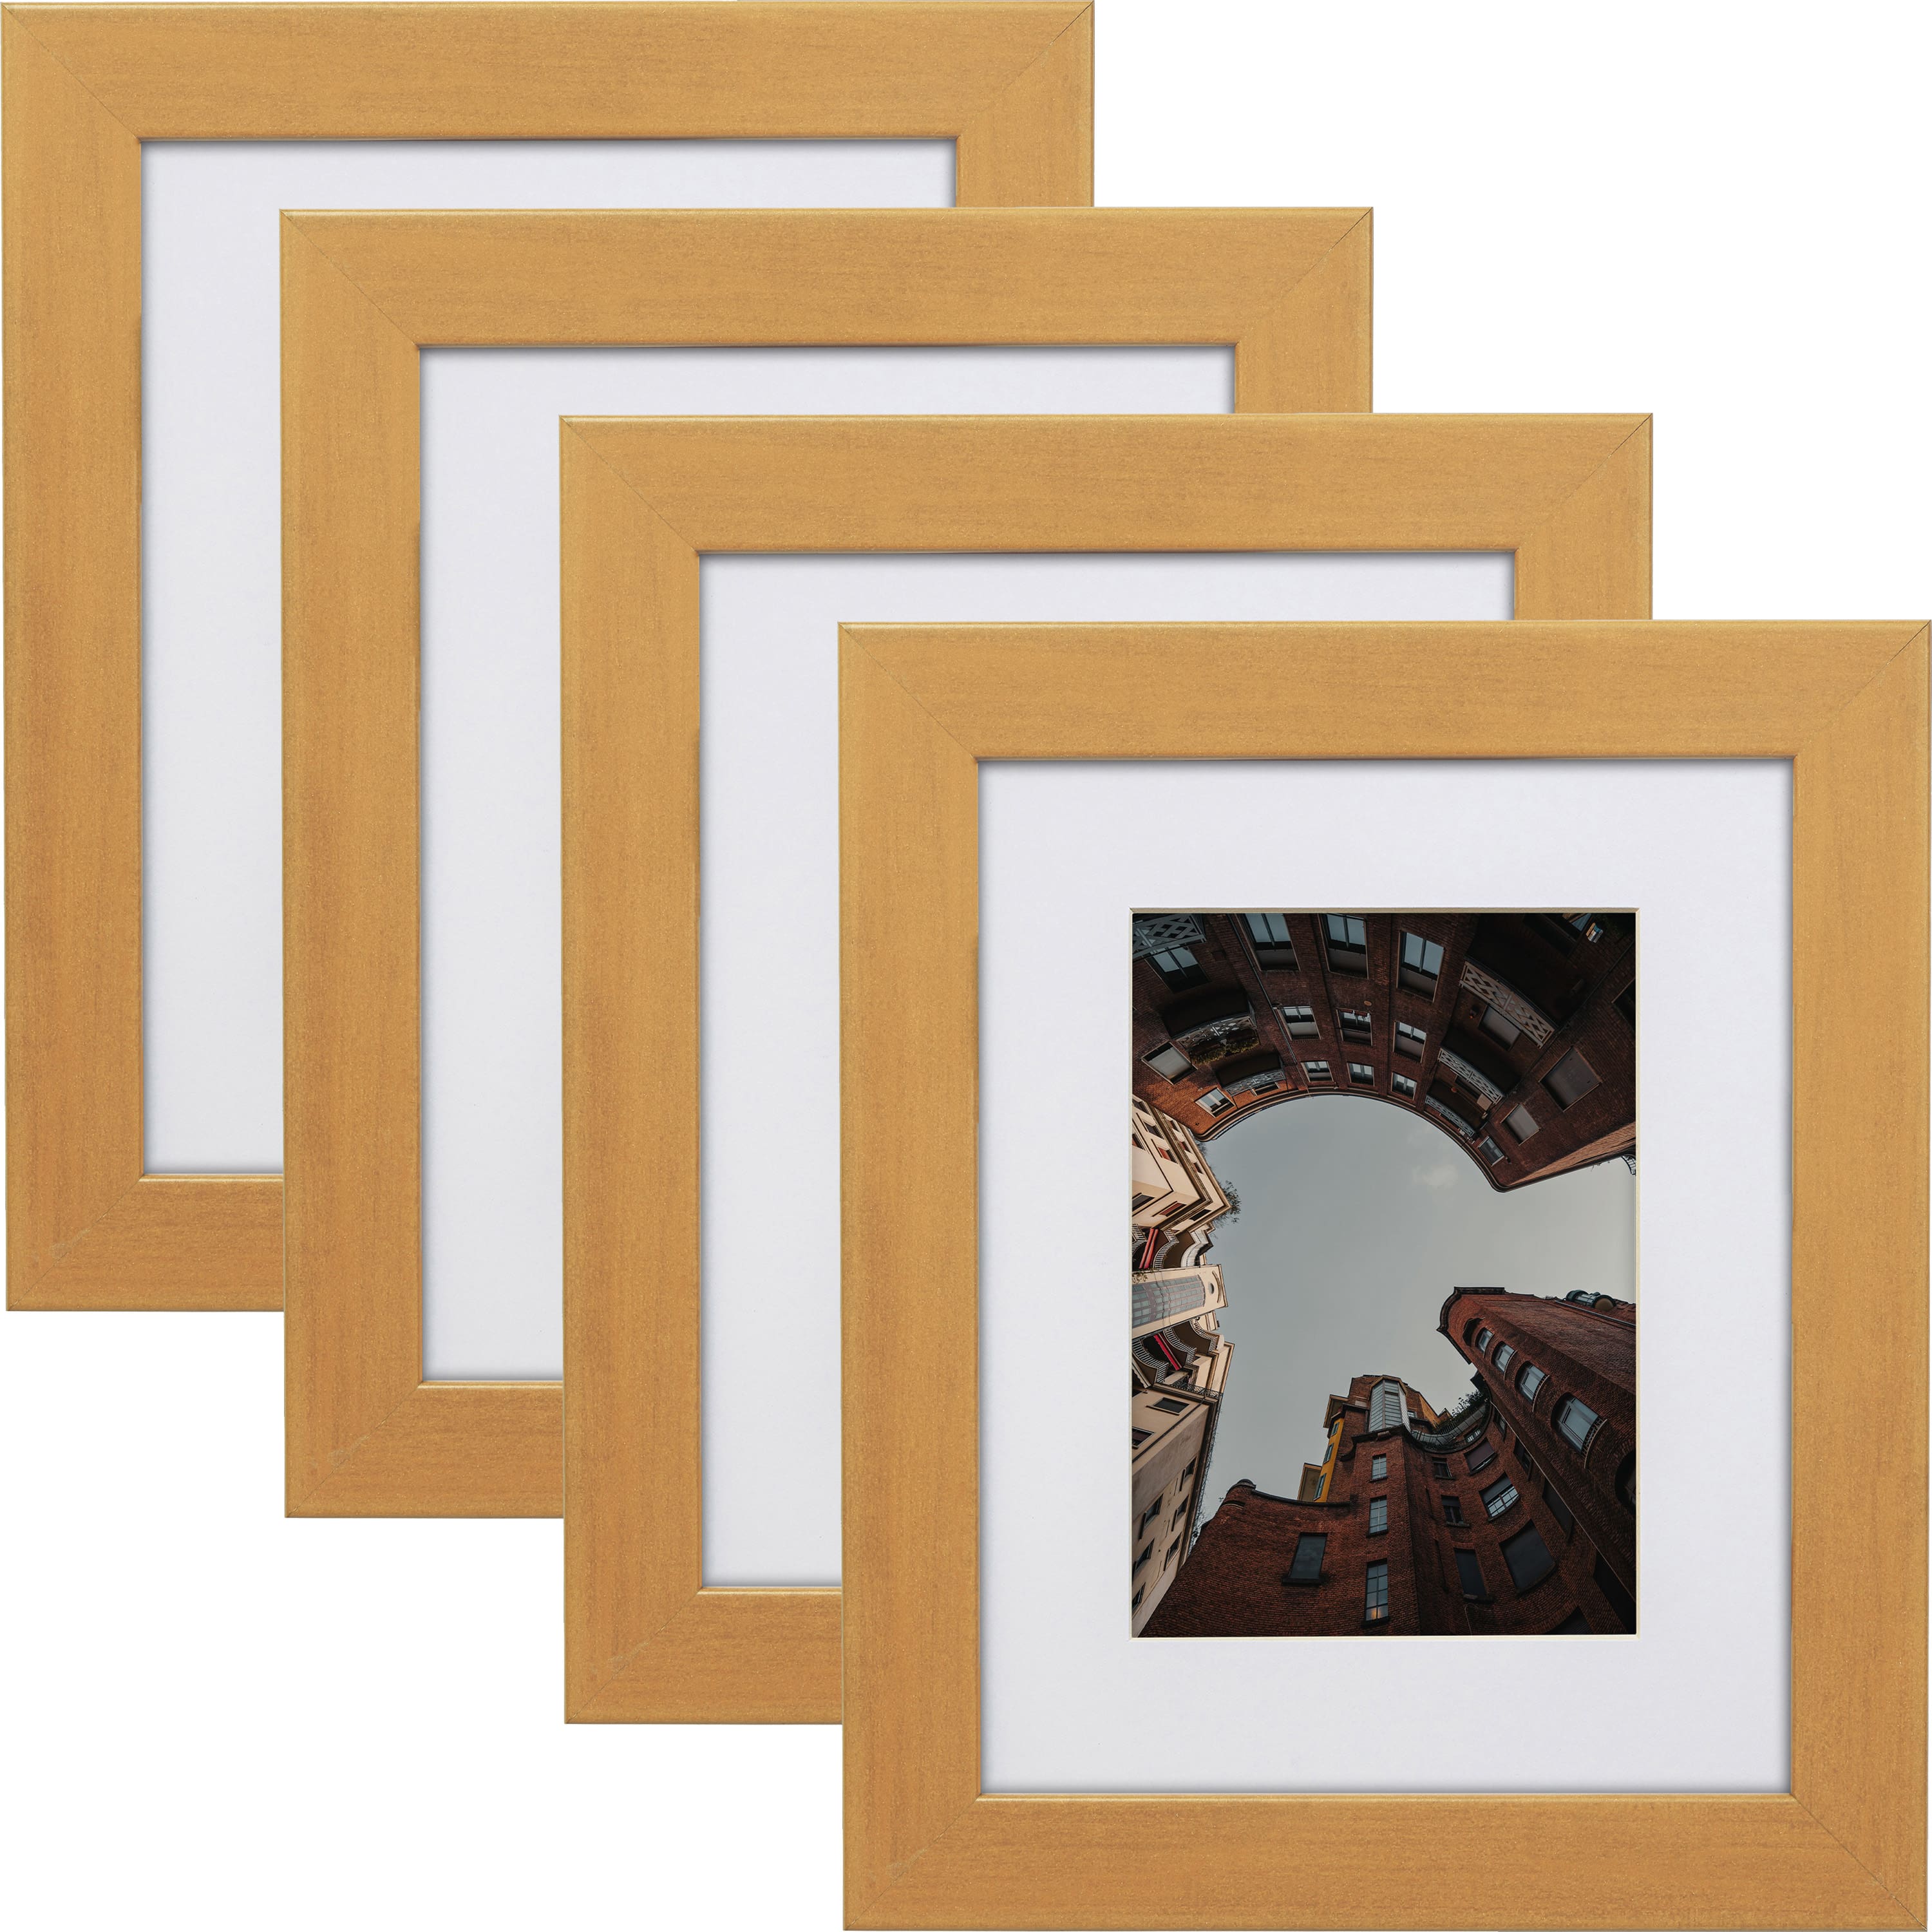 Craig Frames 4 Pack: Bauhaus 125 Distressed Gold Picture Frame with Mat